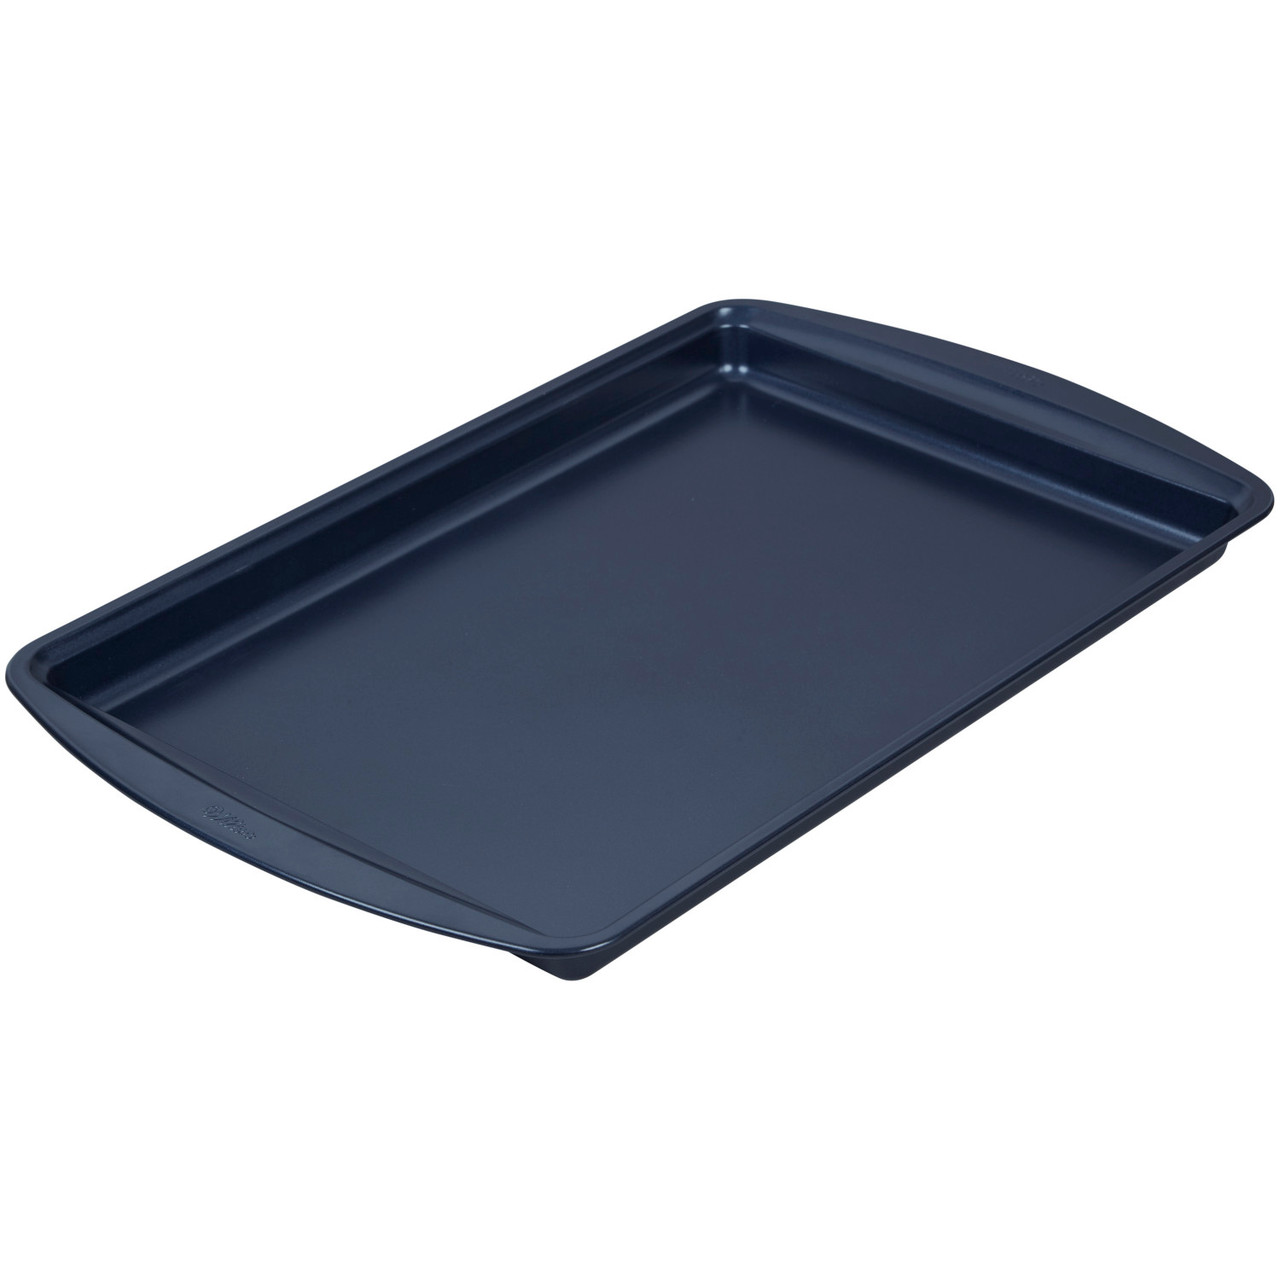 Wilton Diamond-Infused Nonstick 9 x 13 Pan with Cover